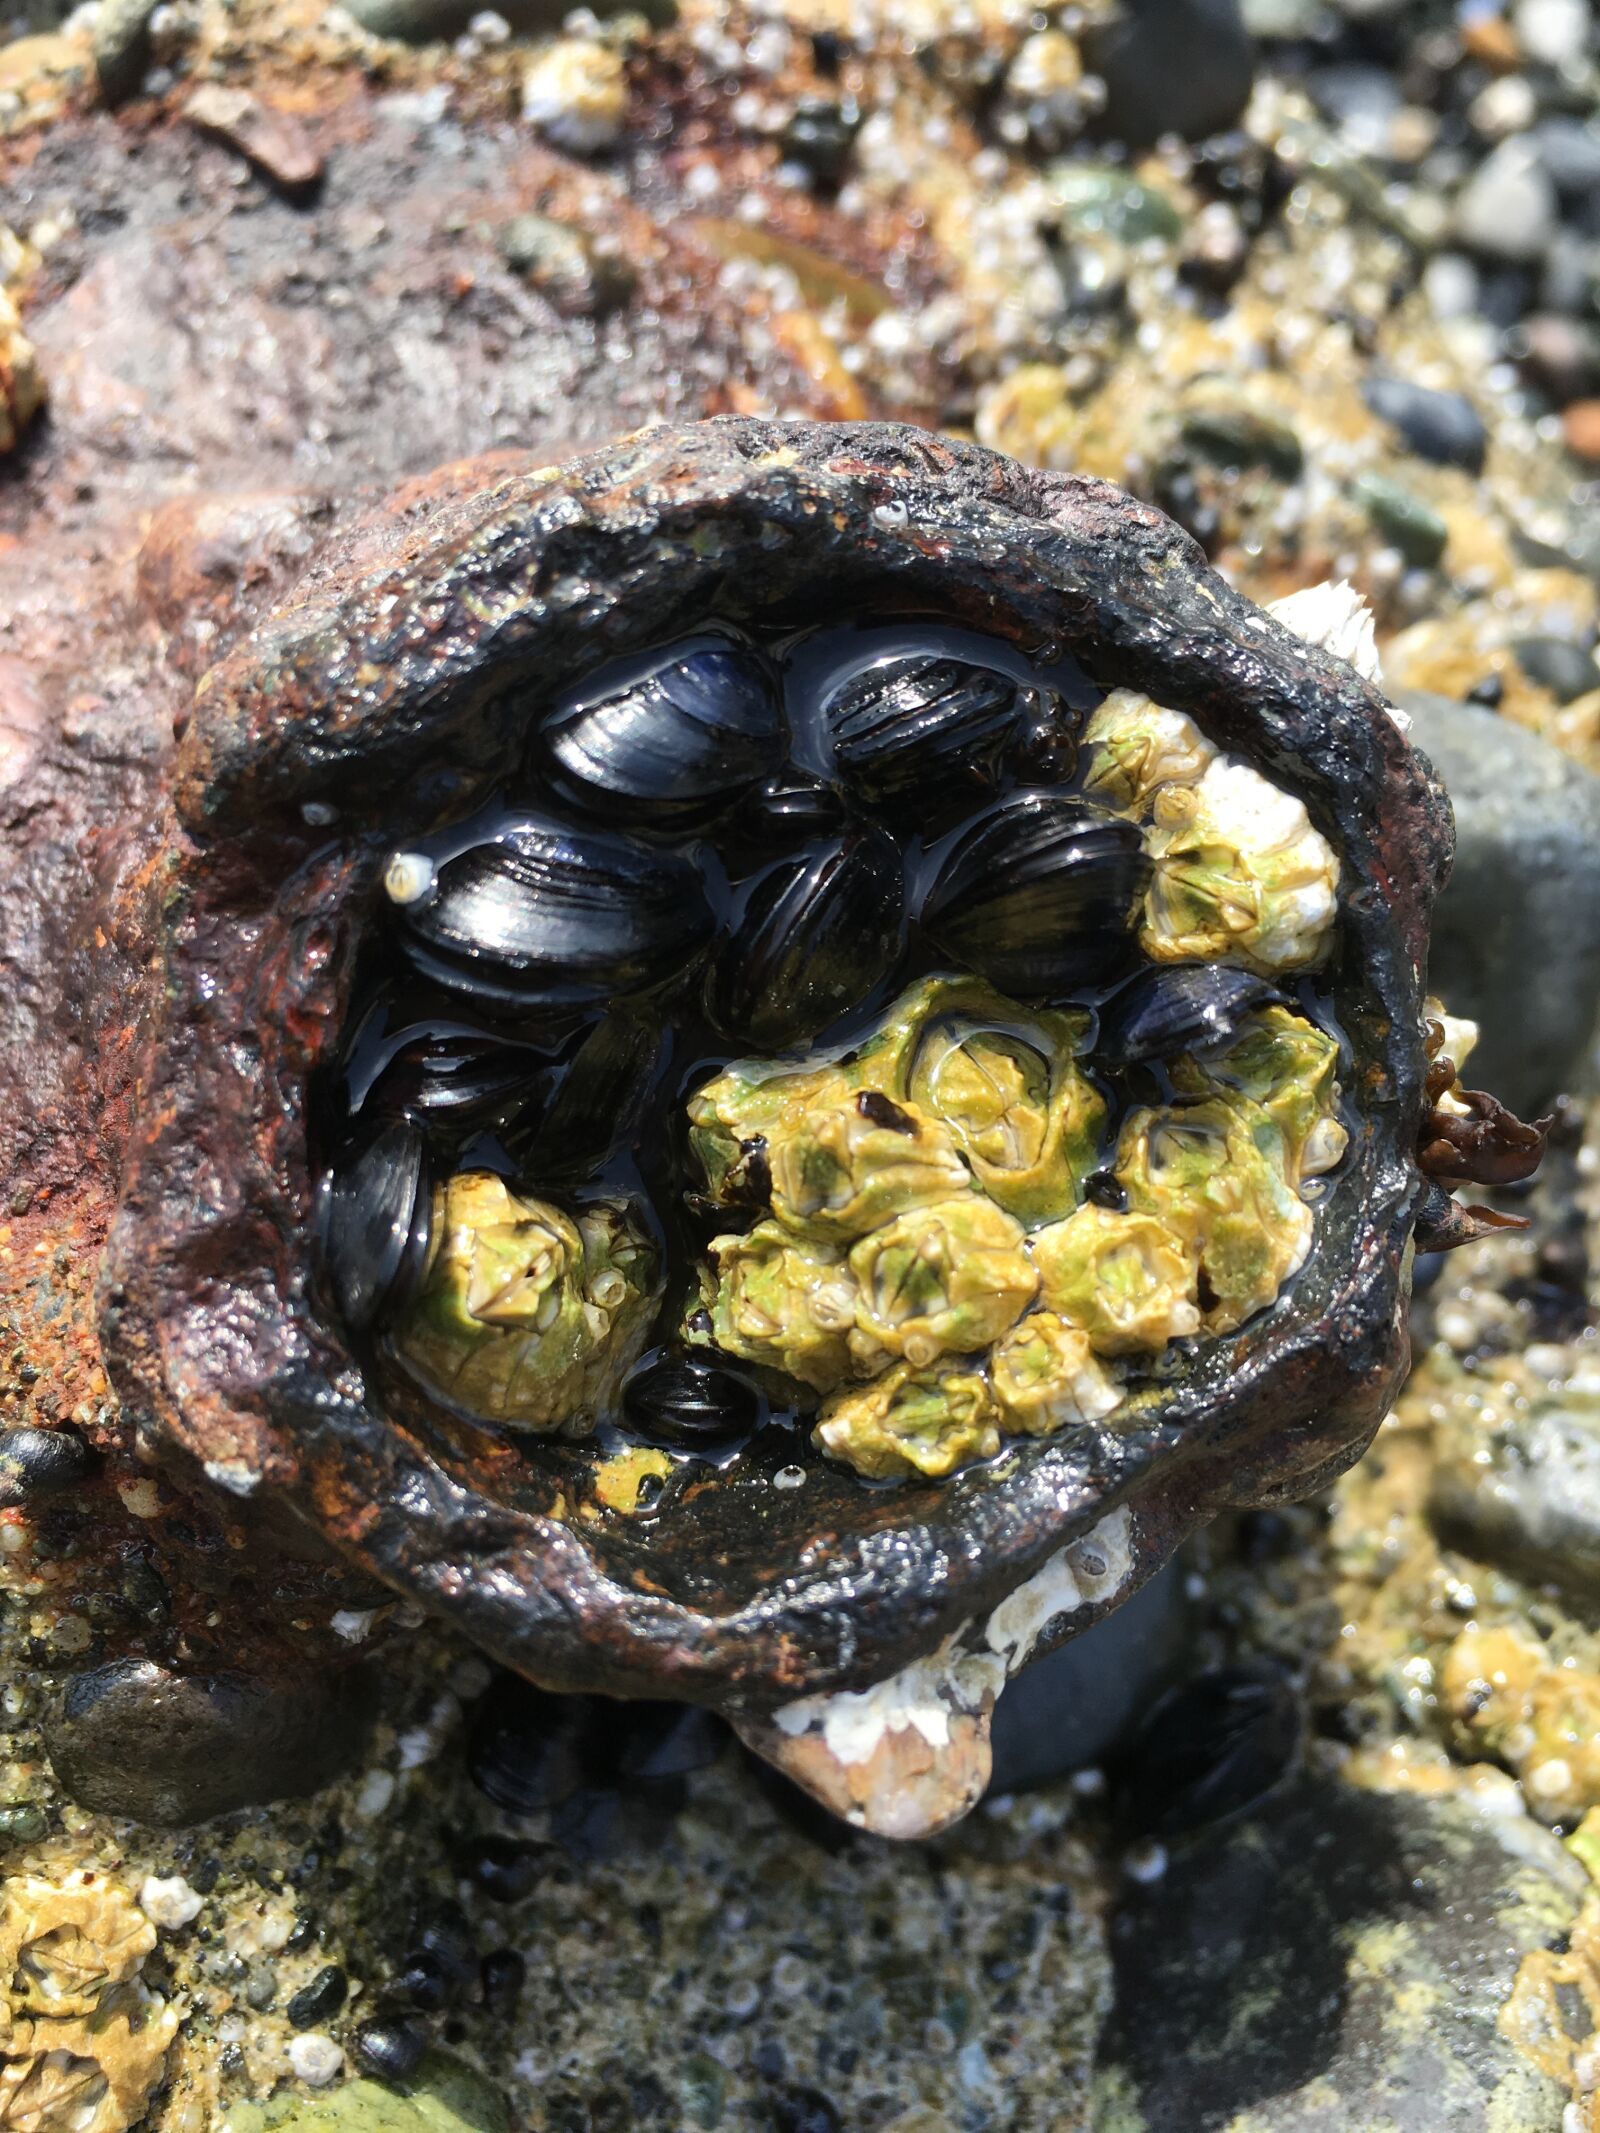 Apple iPhone 6s sample photo. Mussels, nature, clam photography